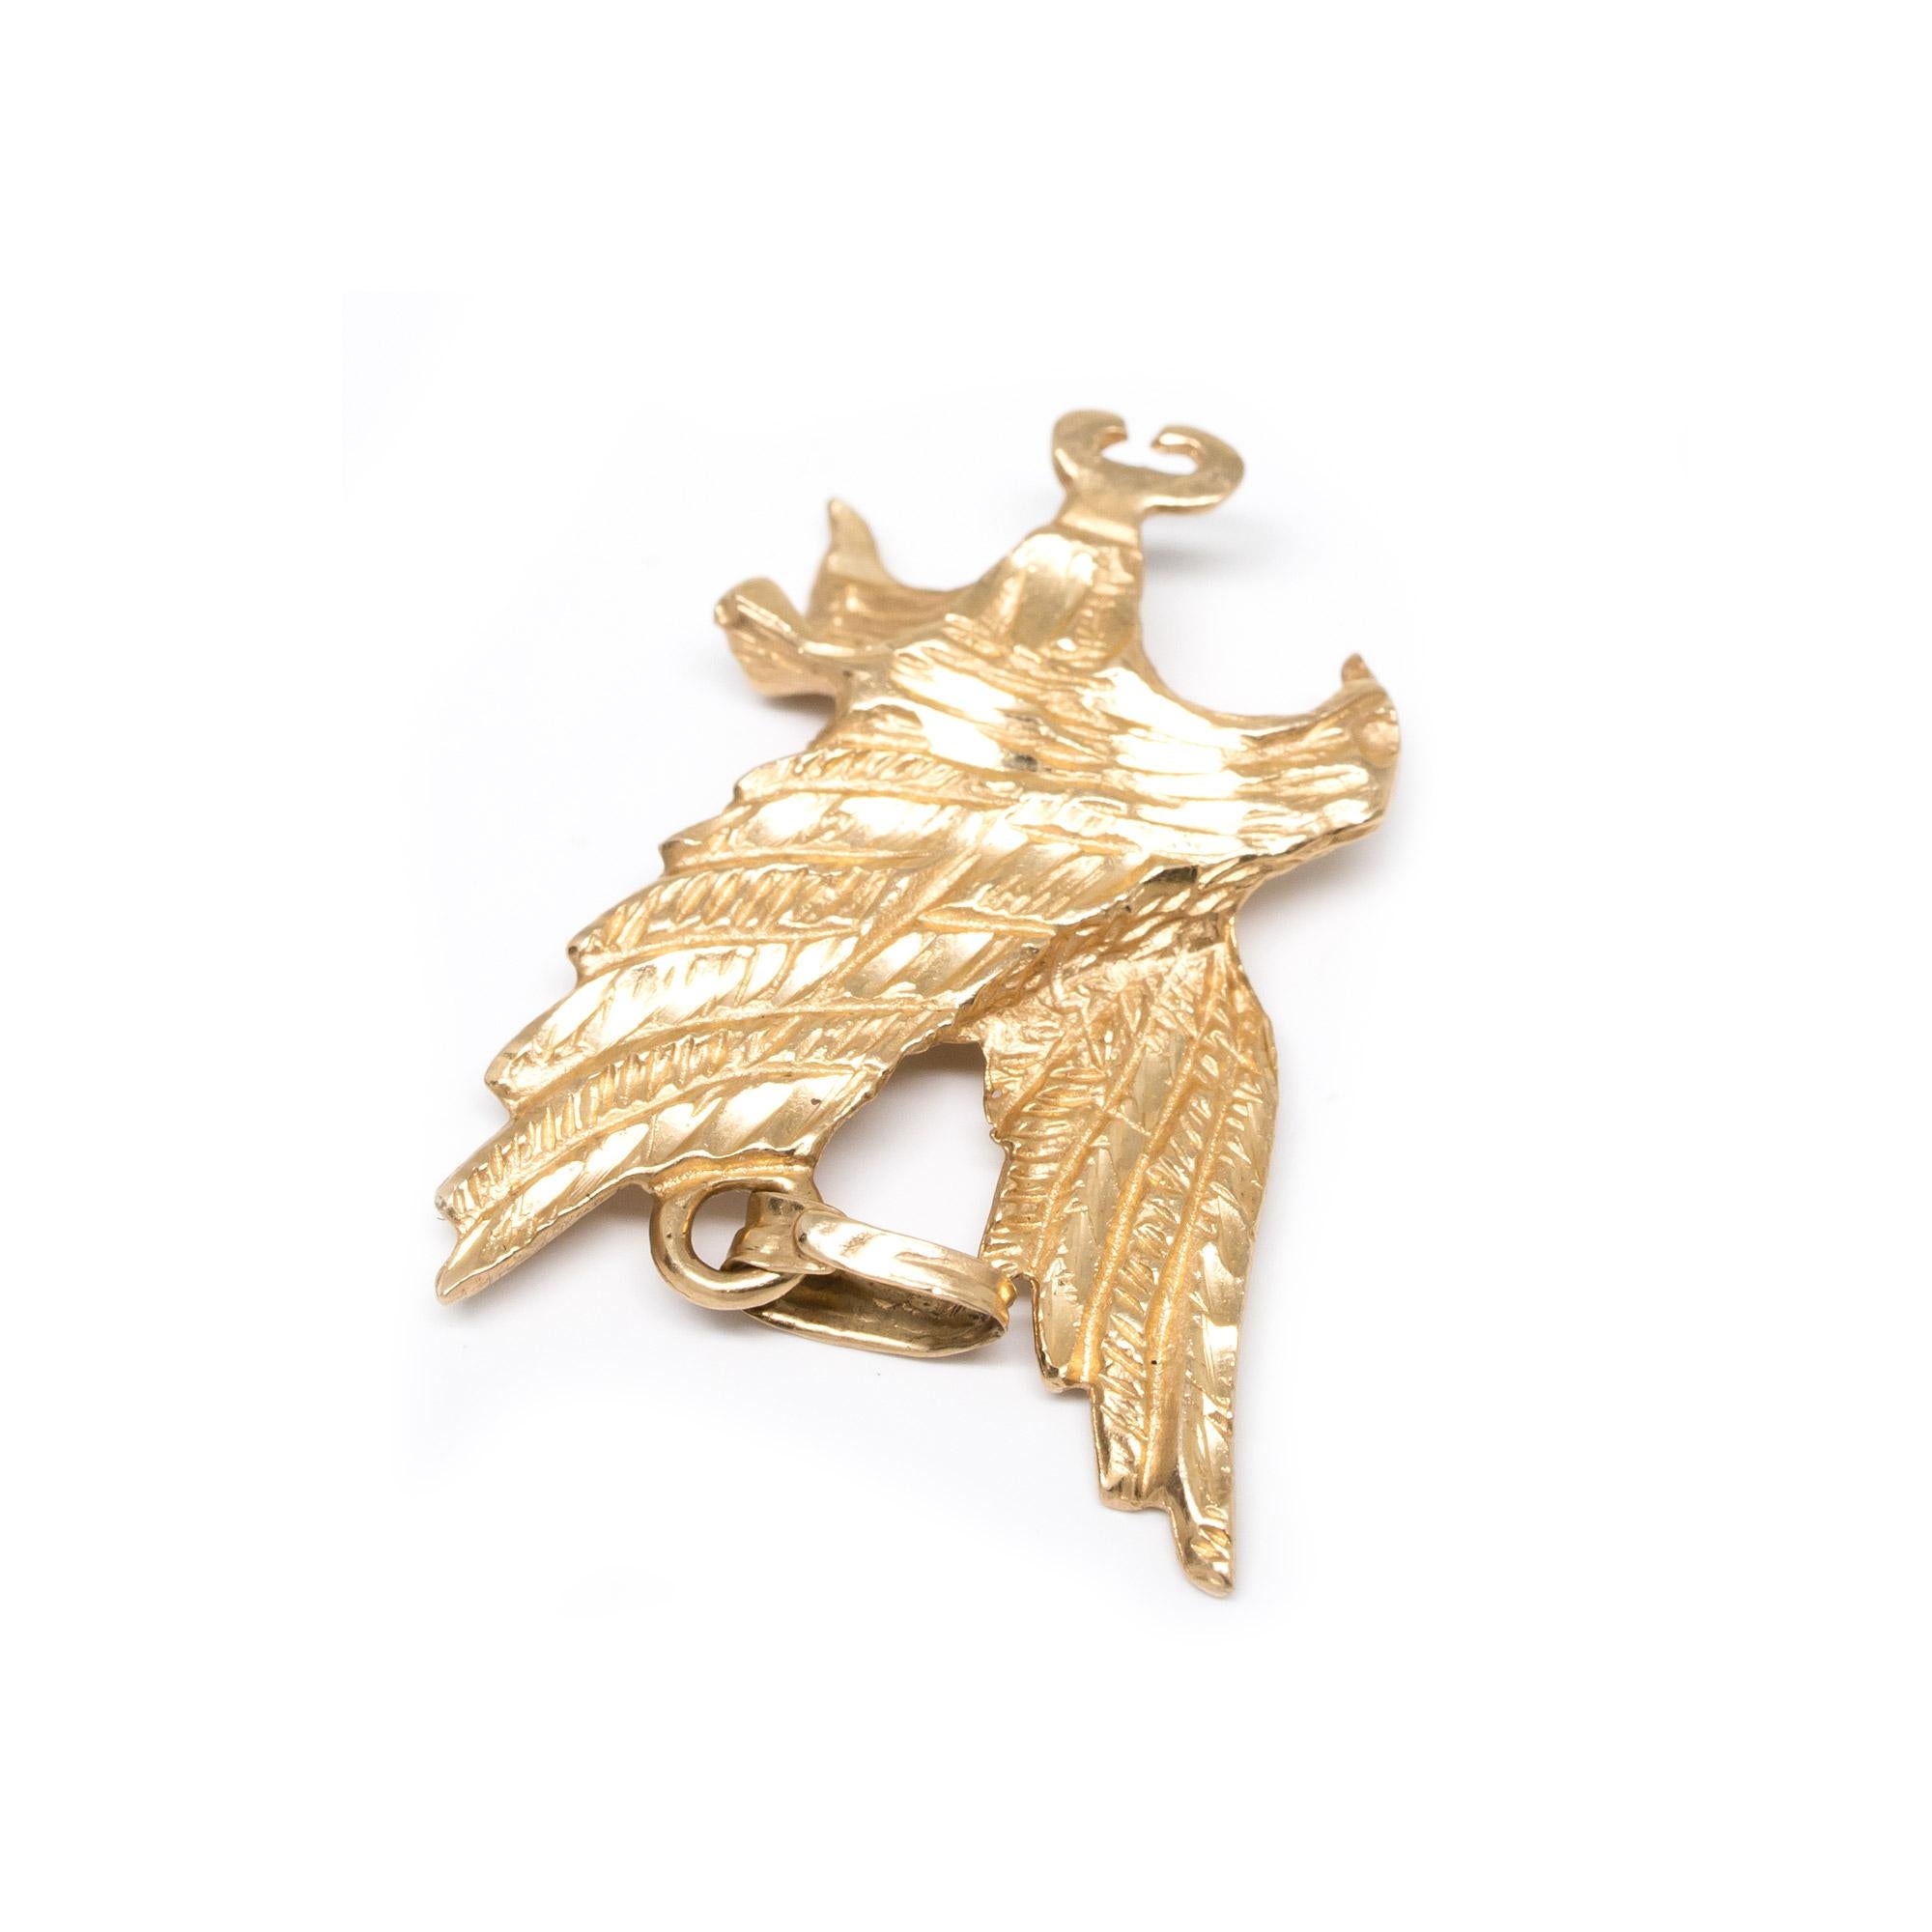 Freedom on the wing, this eagle is the symbol of  all that is free. 

Charm details:
Metal: 14 Karat Yellow Gold
Weight: 2.4 grams

Payment & Refund Details:
*More Pictures Available on Request*

Payment via Visa/Mastercard/Discover/AmericanExpress,